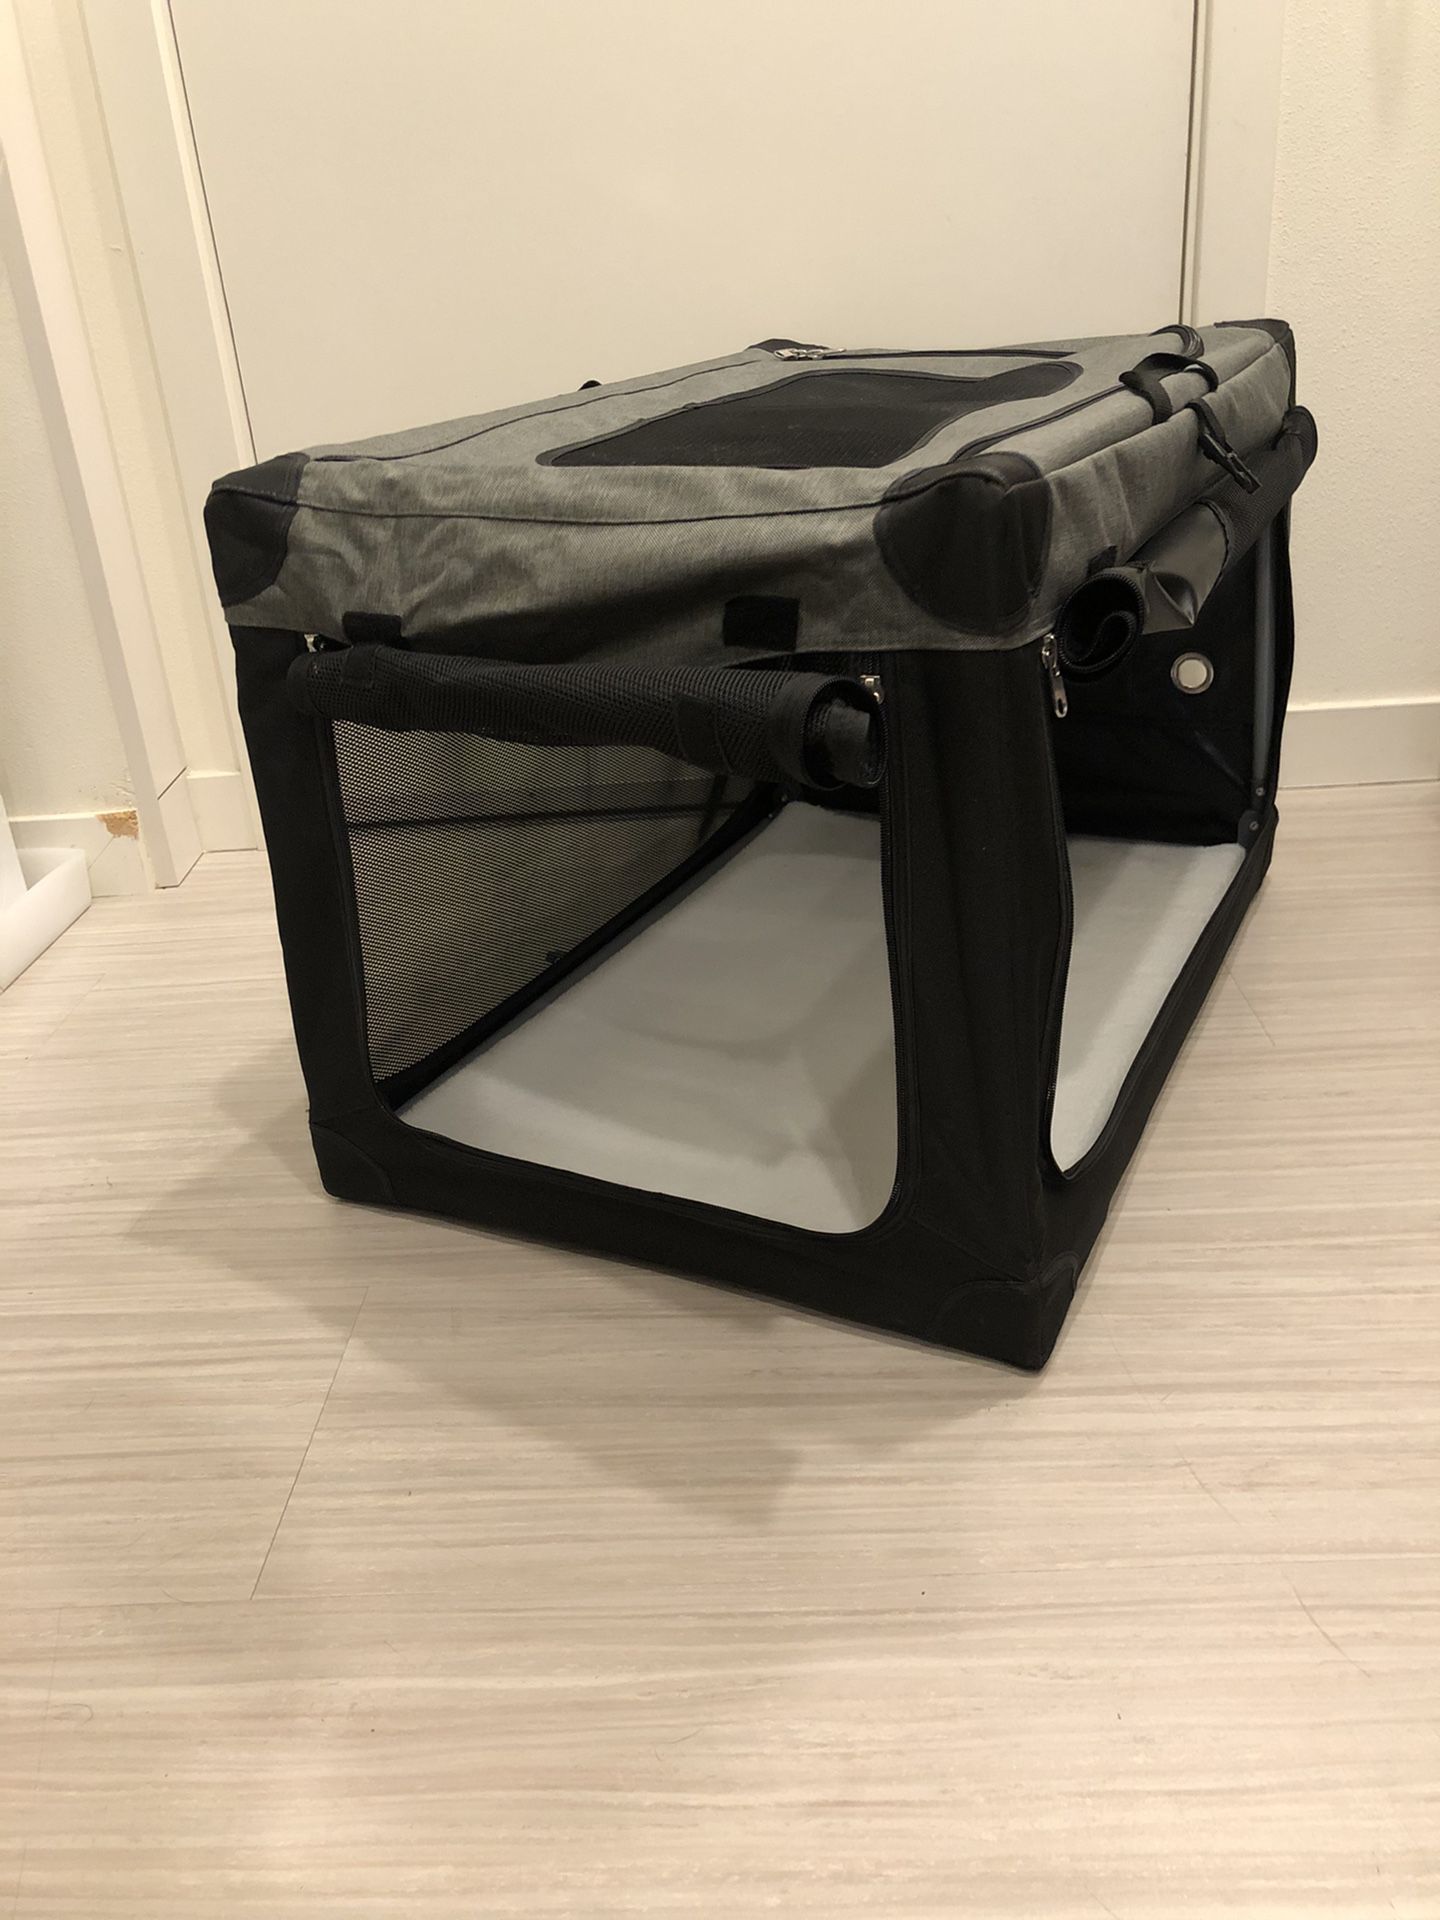 Portable Canvas Crate for Dogs